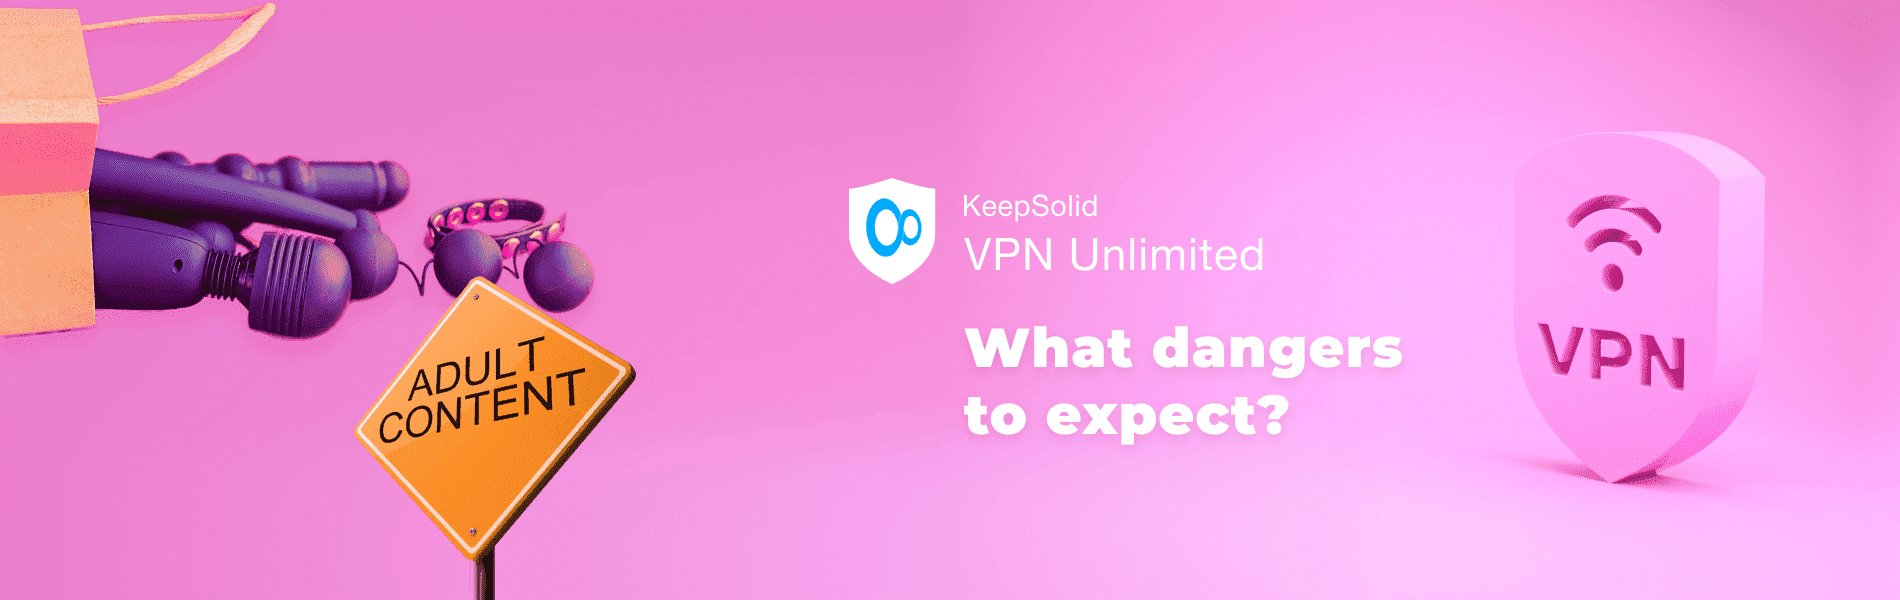 Top 5 Dangers Of Porn Websites And How To Stay Safe Vpn Unlimited